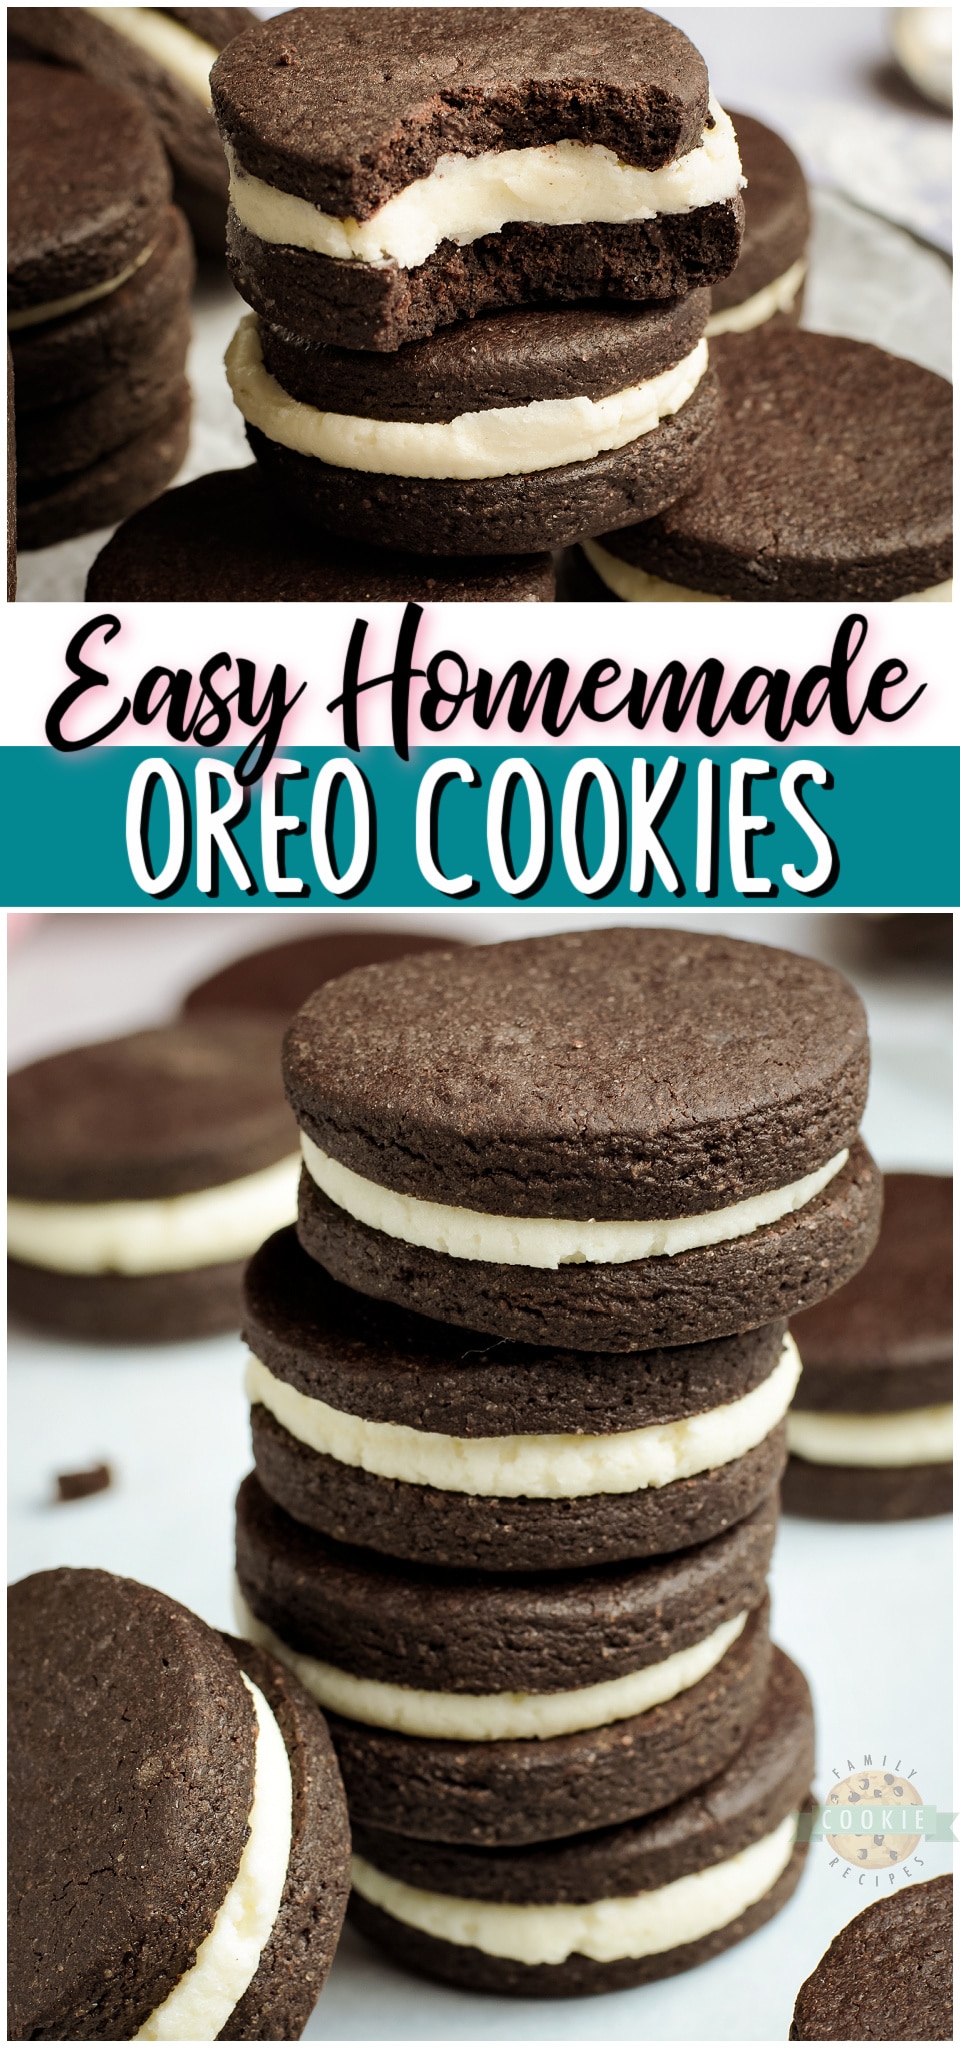 Homemade Oreo Cookies recipe for anyone who loves OREOS! Our Homemade Oreos taste even better with the chocolaty cookies on the outside & buttery vanilla cream on the inside.